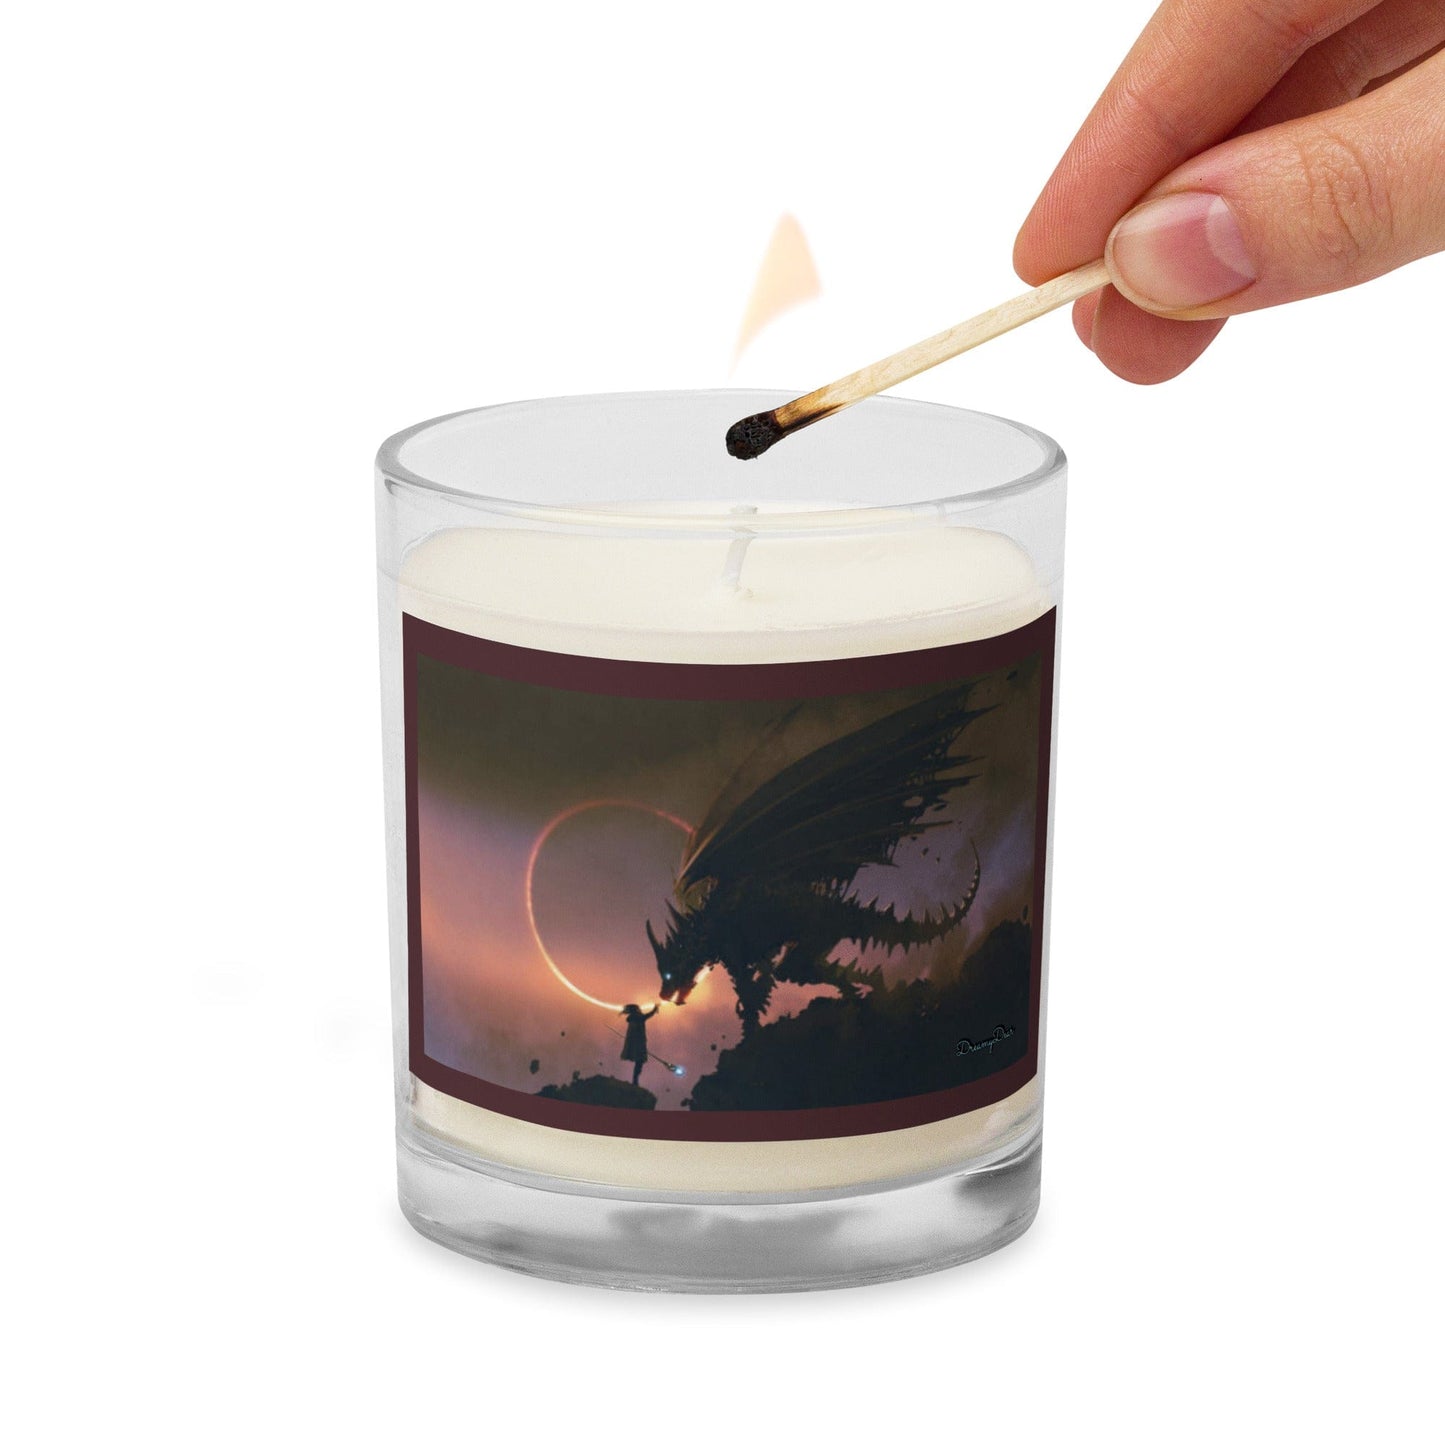 "there there boy" soy wax candle